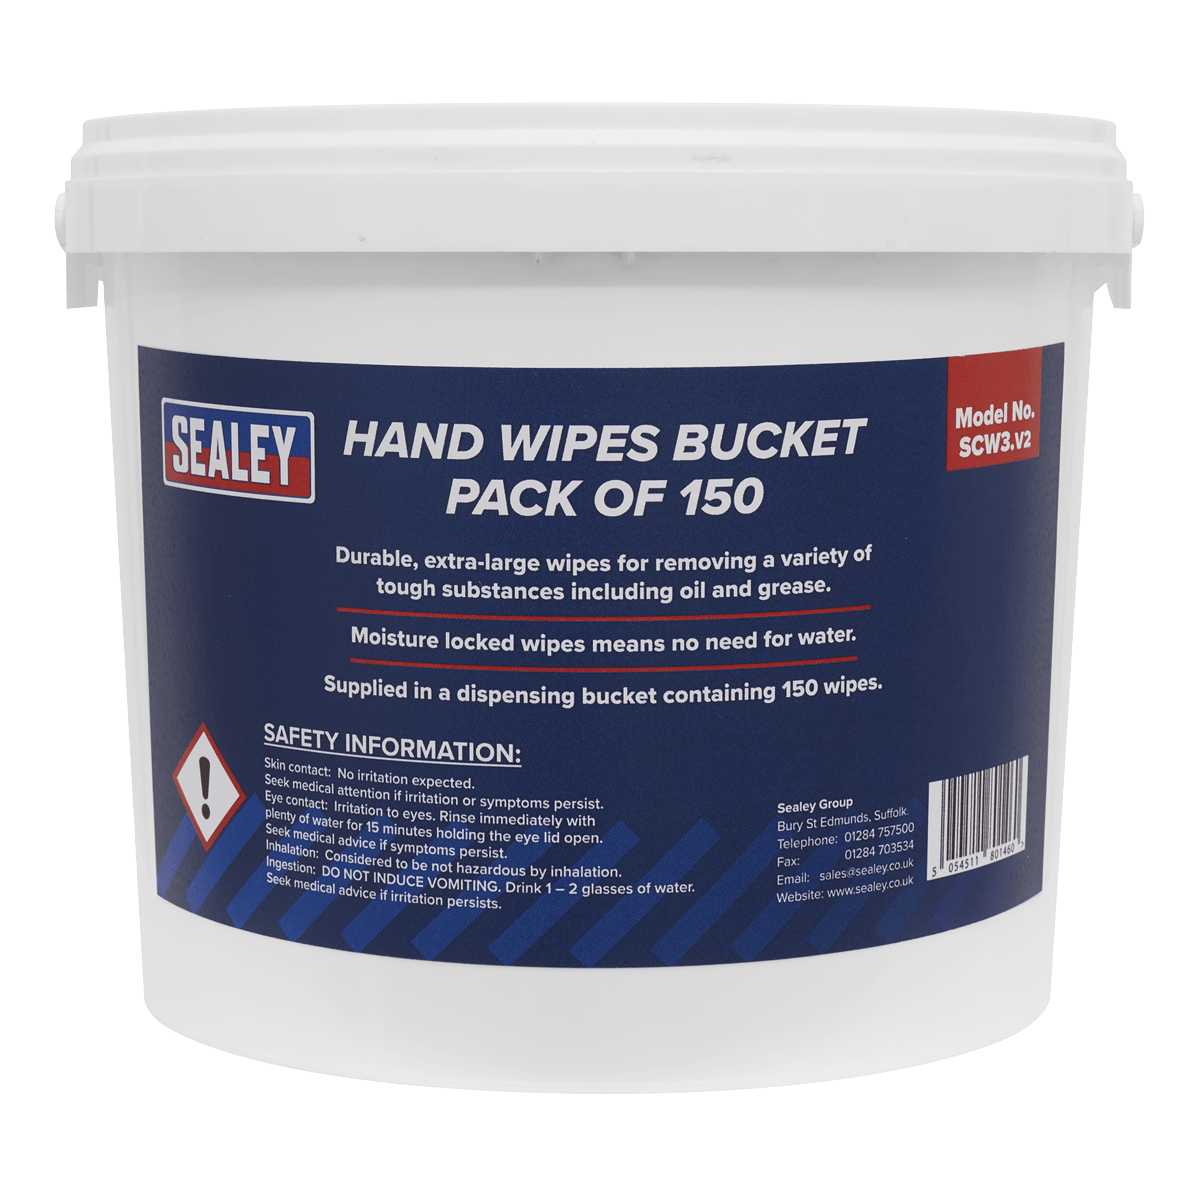 Hand Wipes Bucket - Pack of 150 | Durable, extra-large wipes for removing a variety of tough substances including oil and grease. | toolforce.ie